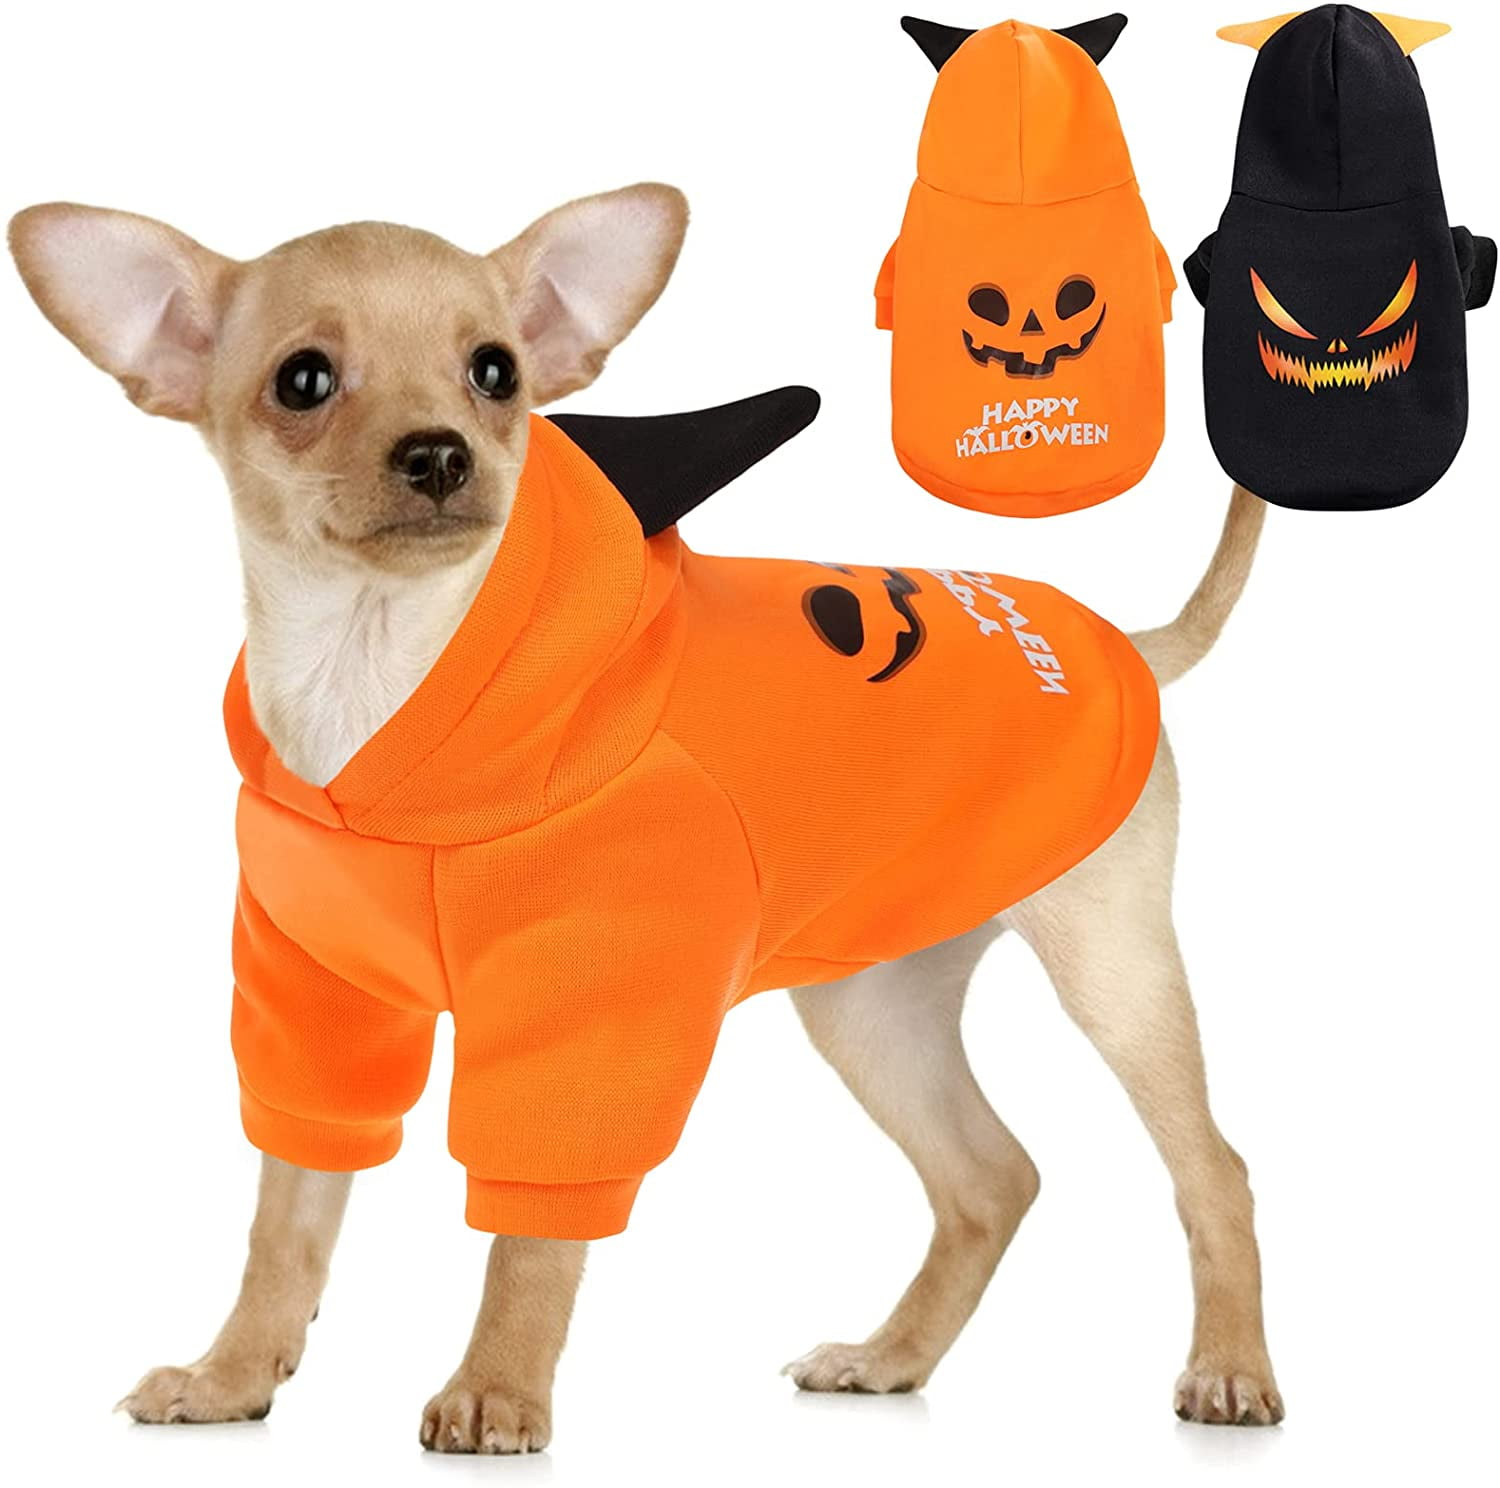 Halloween Devil Dog Hoodies with Hat Funny Cat Clothes Pumpkin Demon Design Warm Pet Suit Two-Legged Costume for Small Medium Dogs